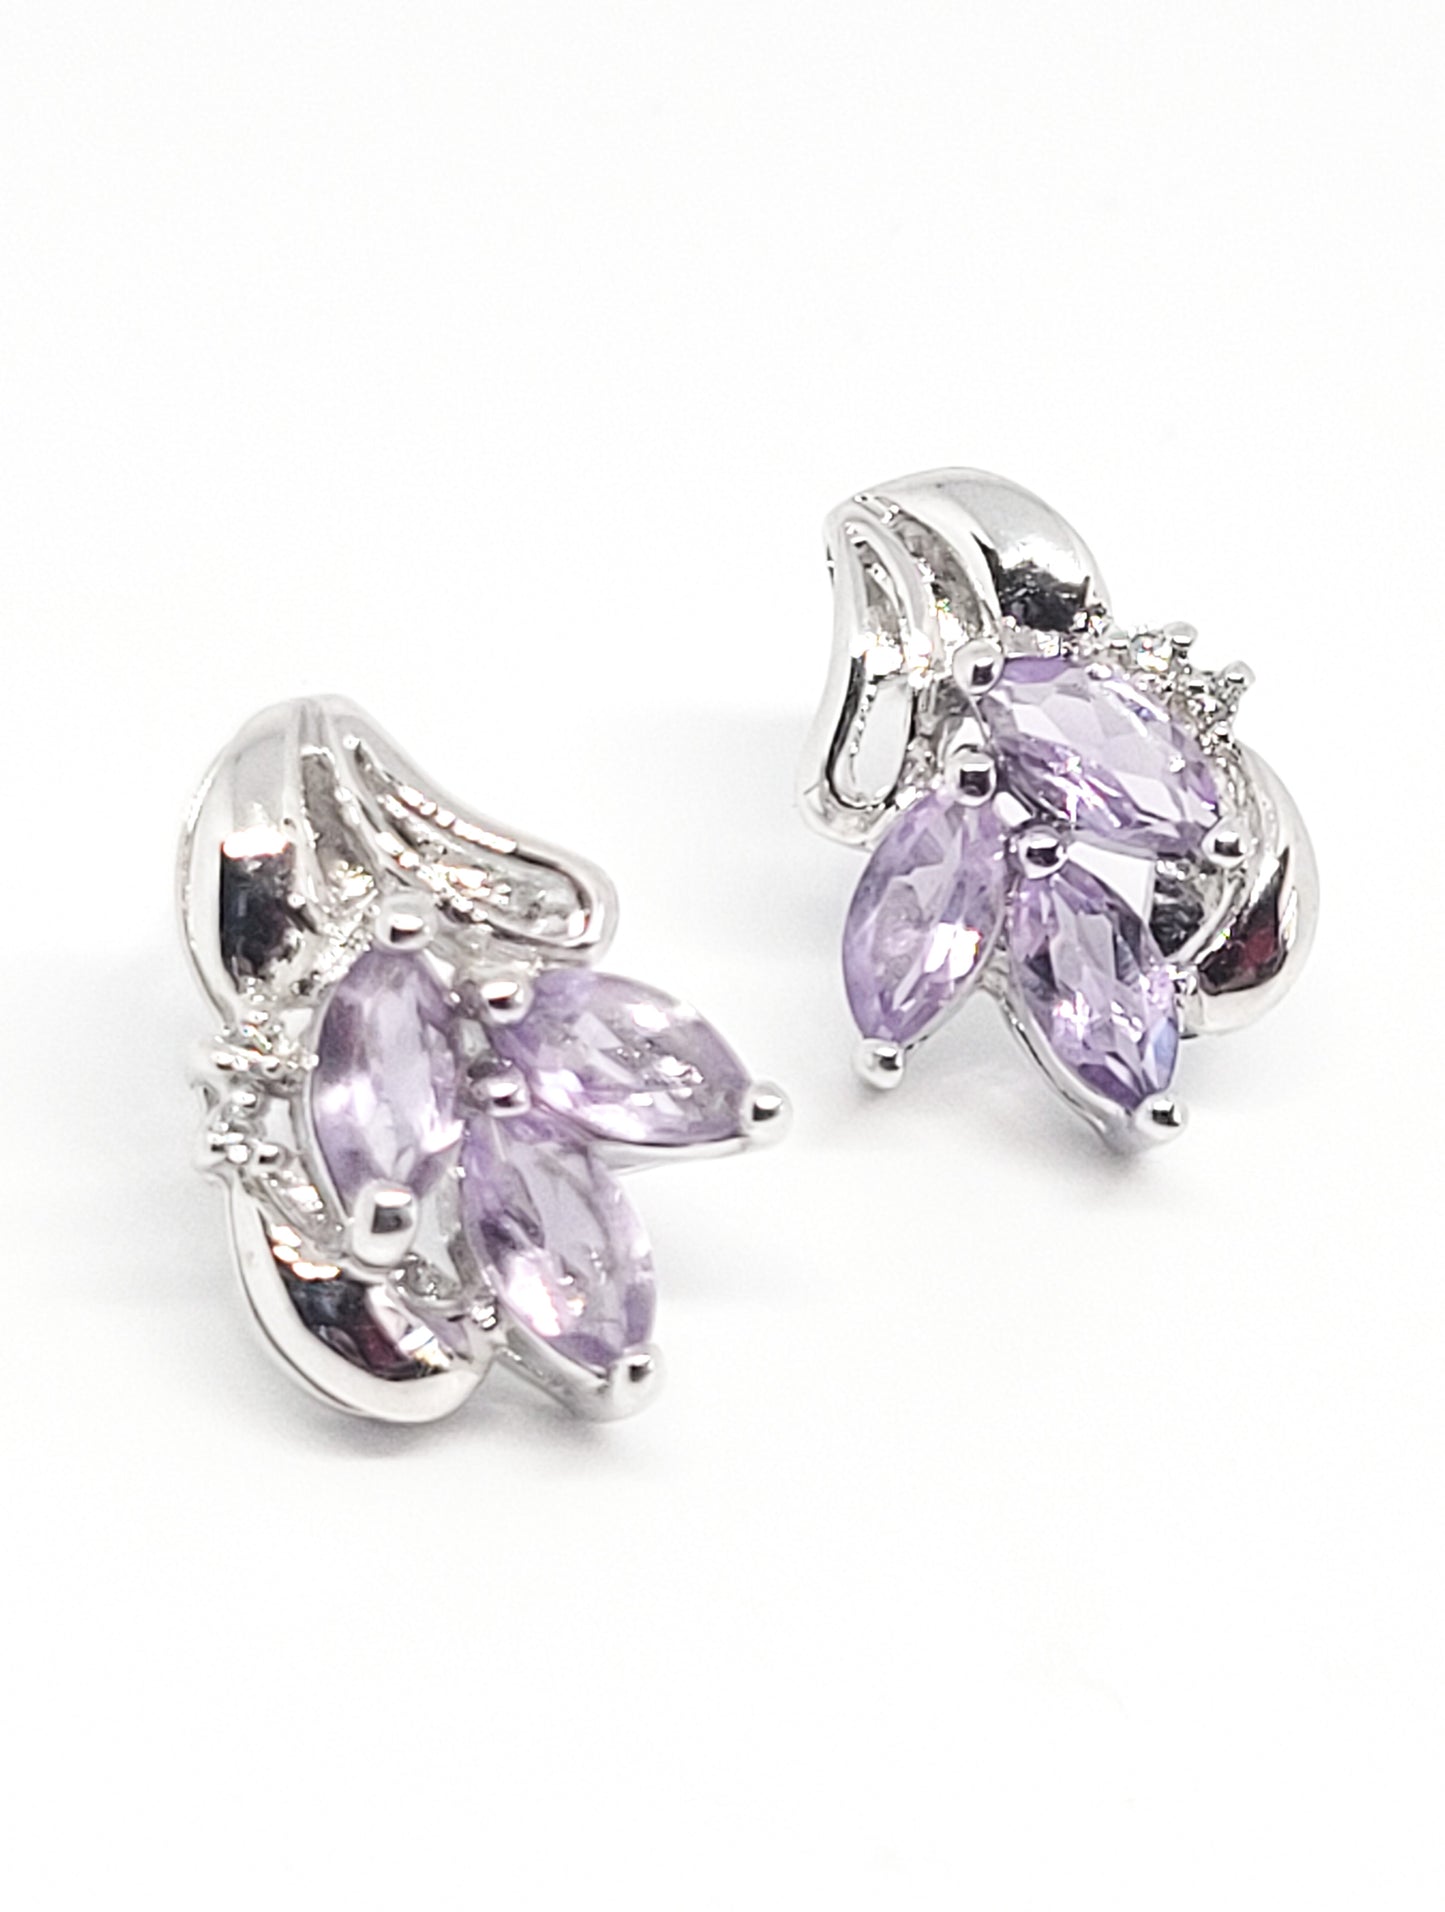 MMI amethyst and cubic zirconia sterling silver cluster earrings 925